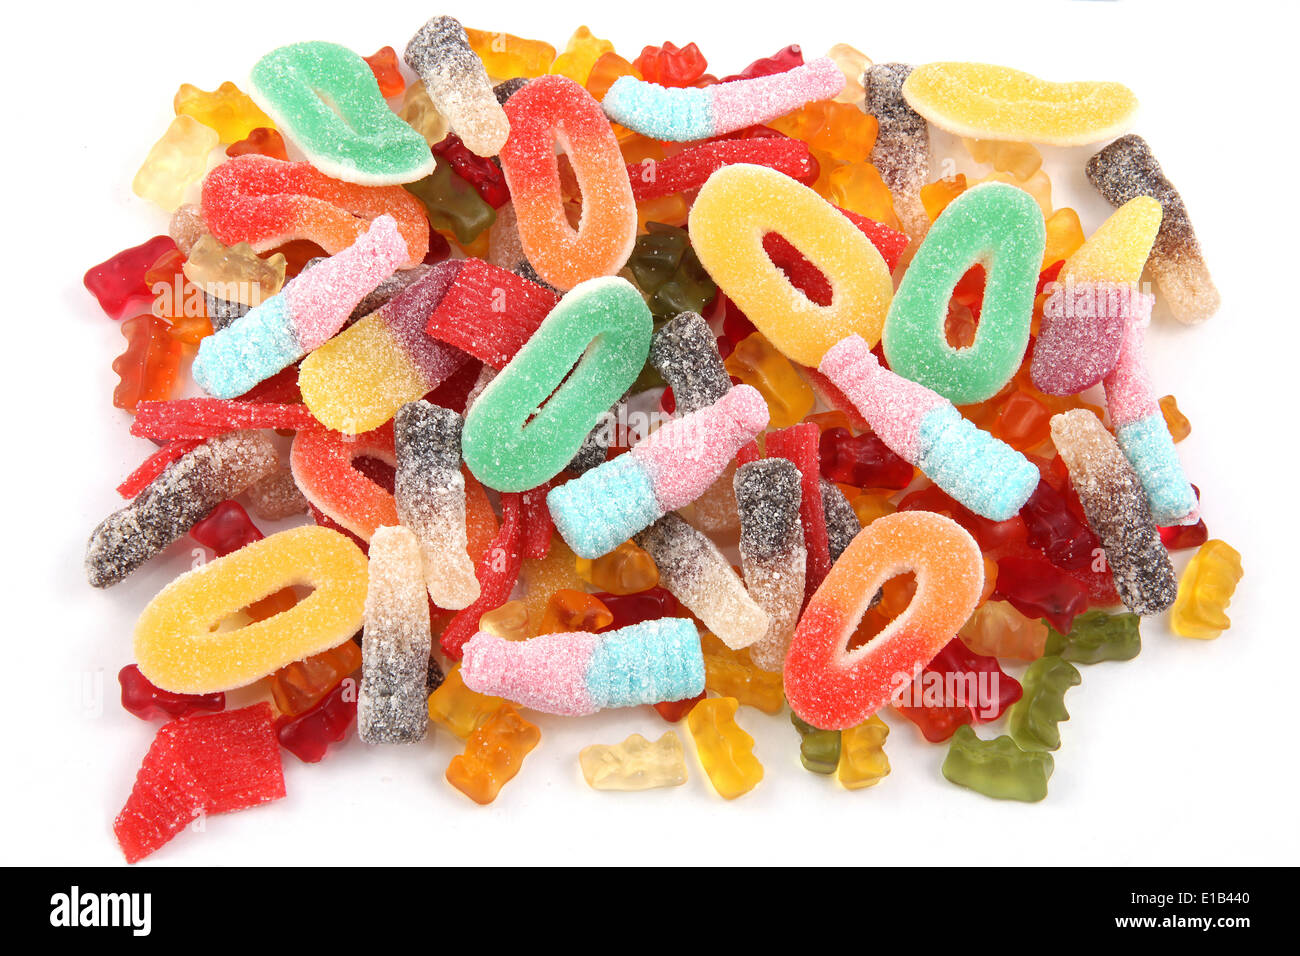 Kids gummy candies or sweeties in multi colors and a variety of shapes. Stock Photo